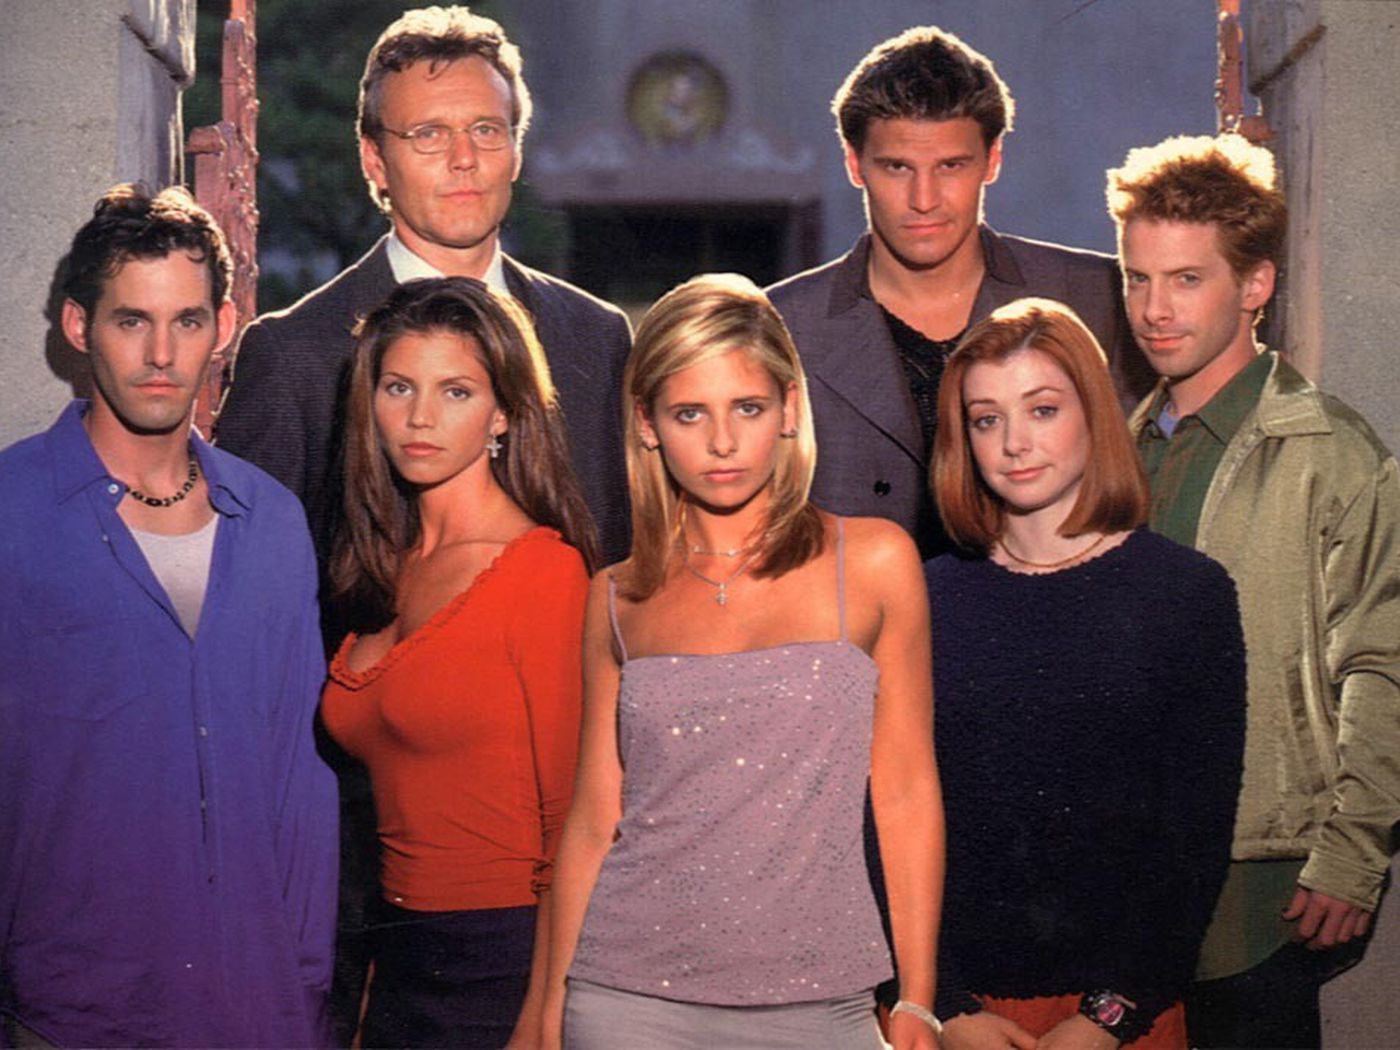 Skulle Rektangel utilsigtet Every episode of Buffy, ranked, in honor of its 20th anniversary - Vox